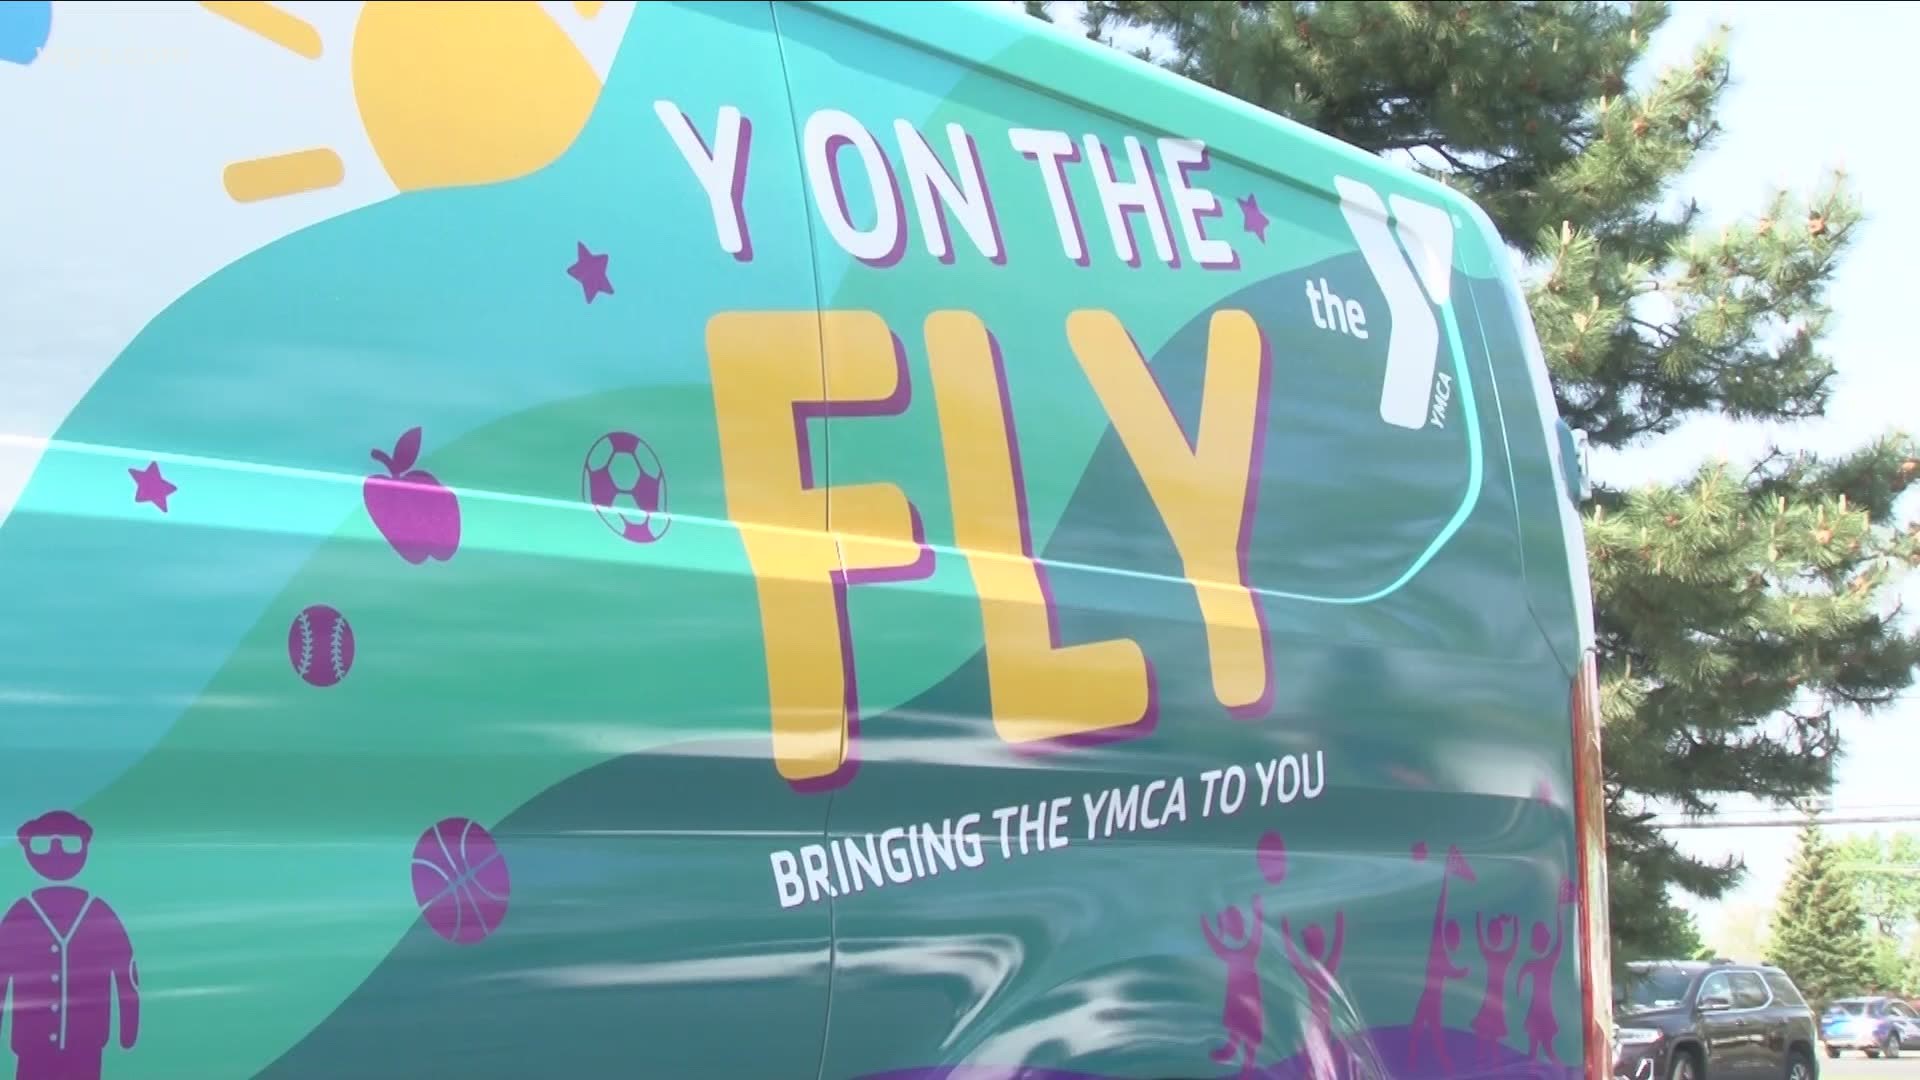 Most Buffalo: 'Y on the fly'